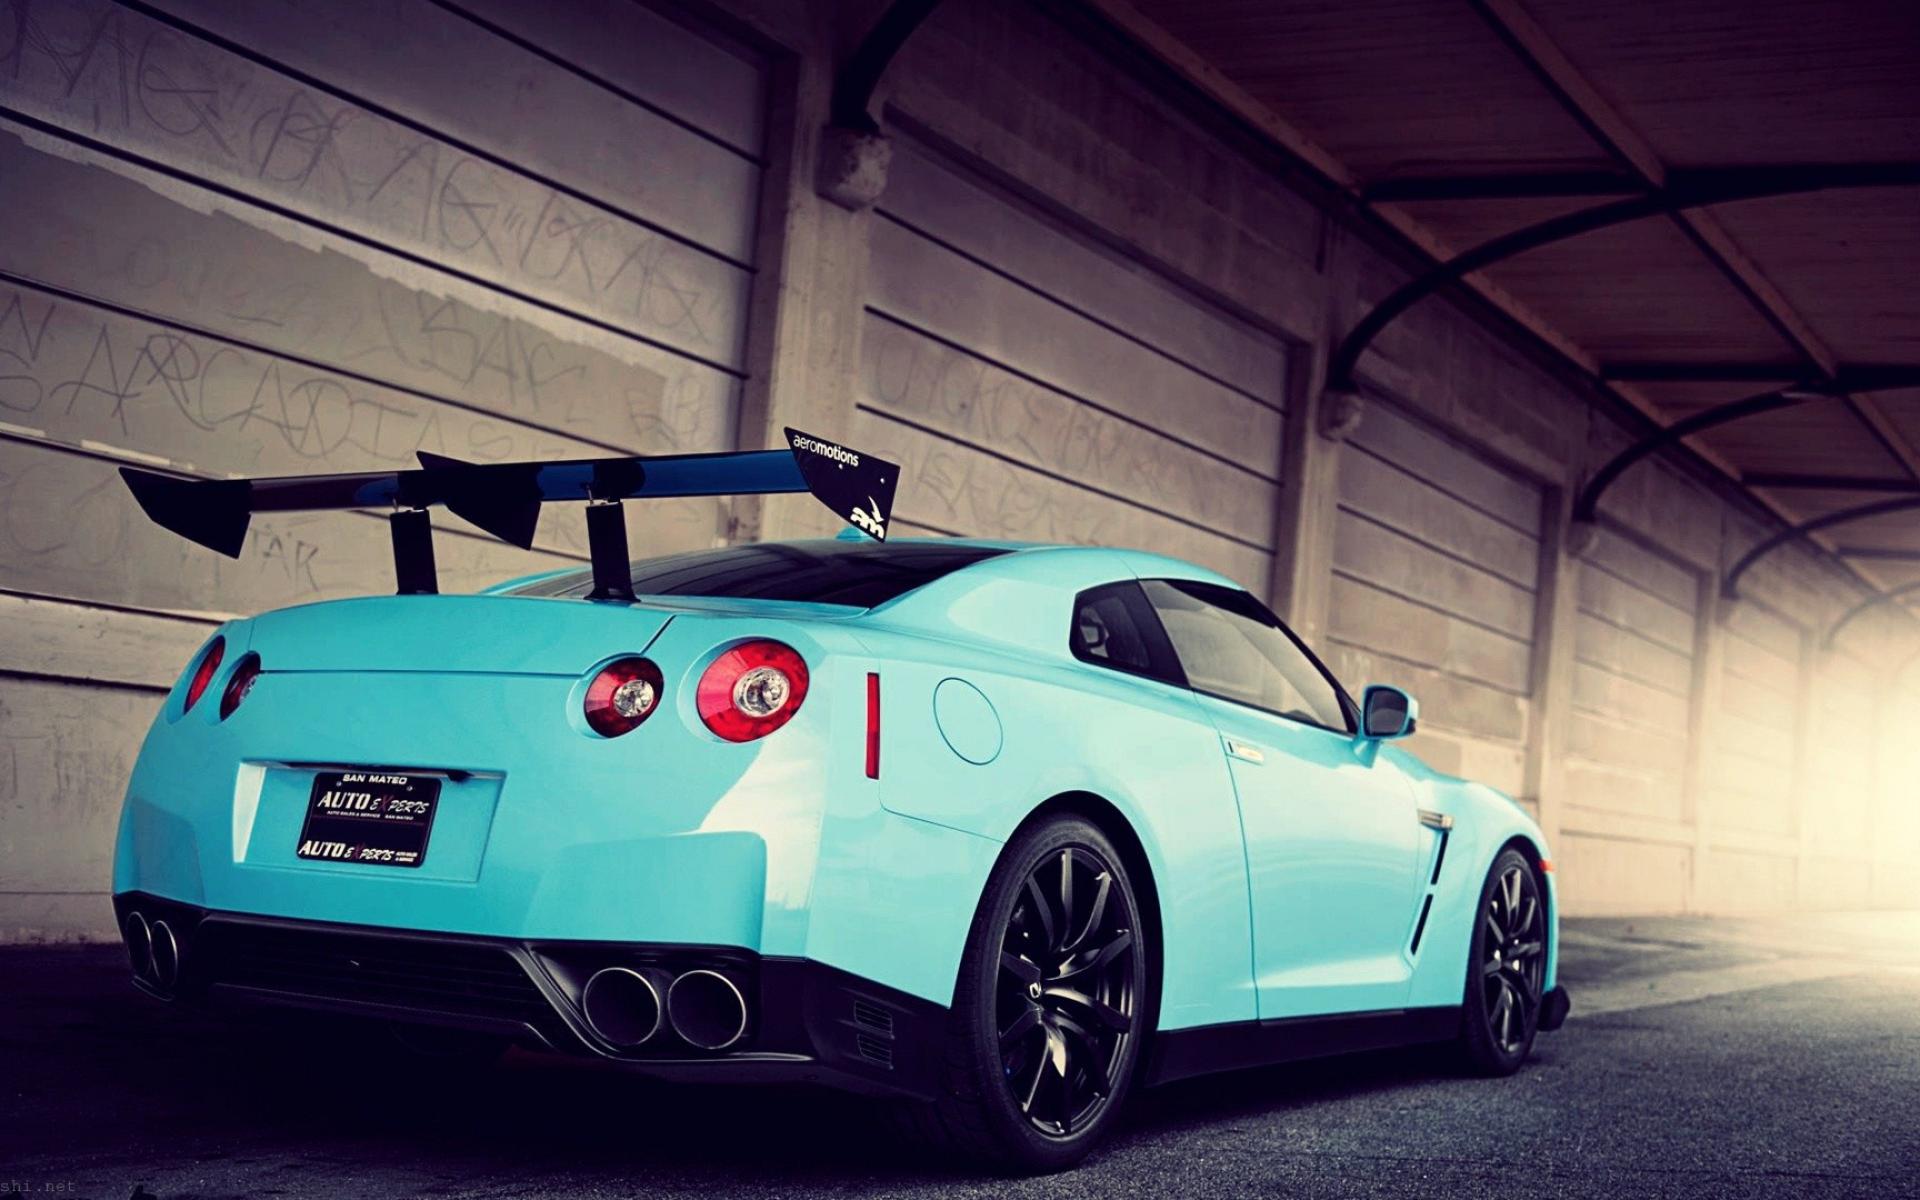 Free Images Nissan Gtr Wallpaper Hd2643 With Nissan - Nissan Gtr Baby Blue  - 1920x1200 Wallpaper 